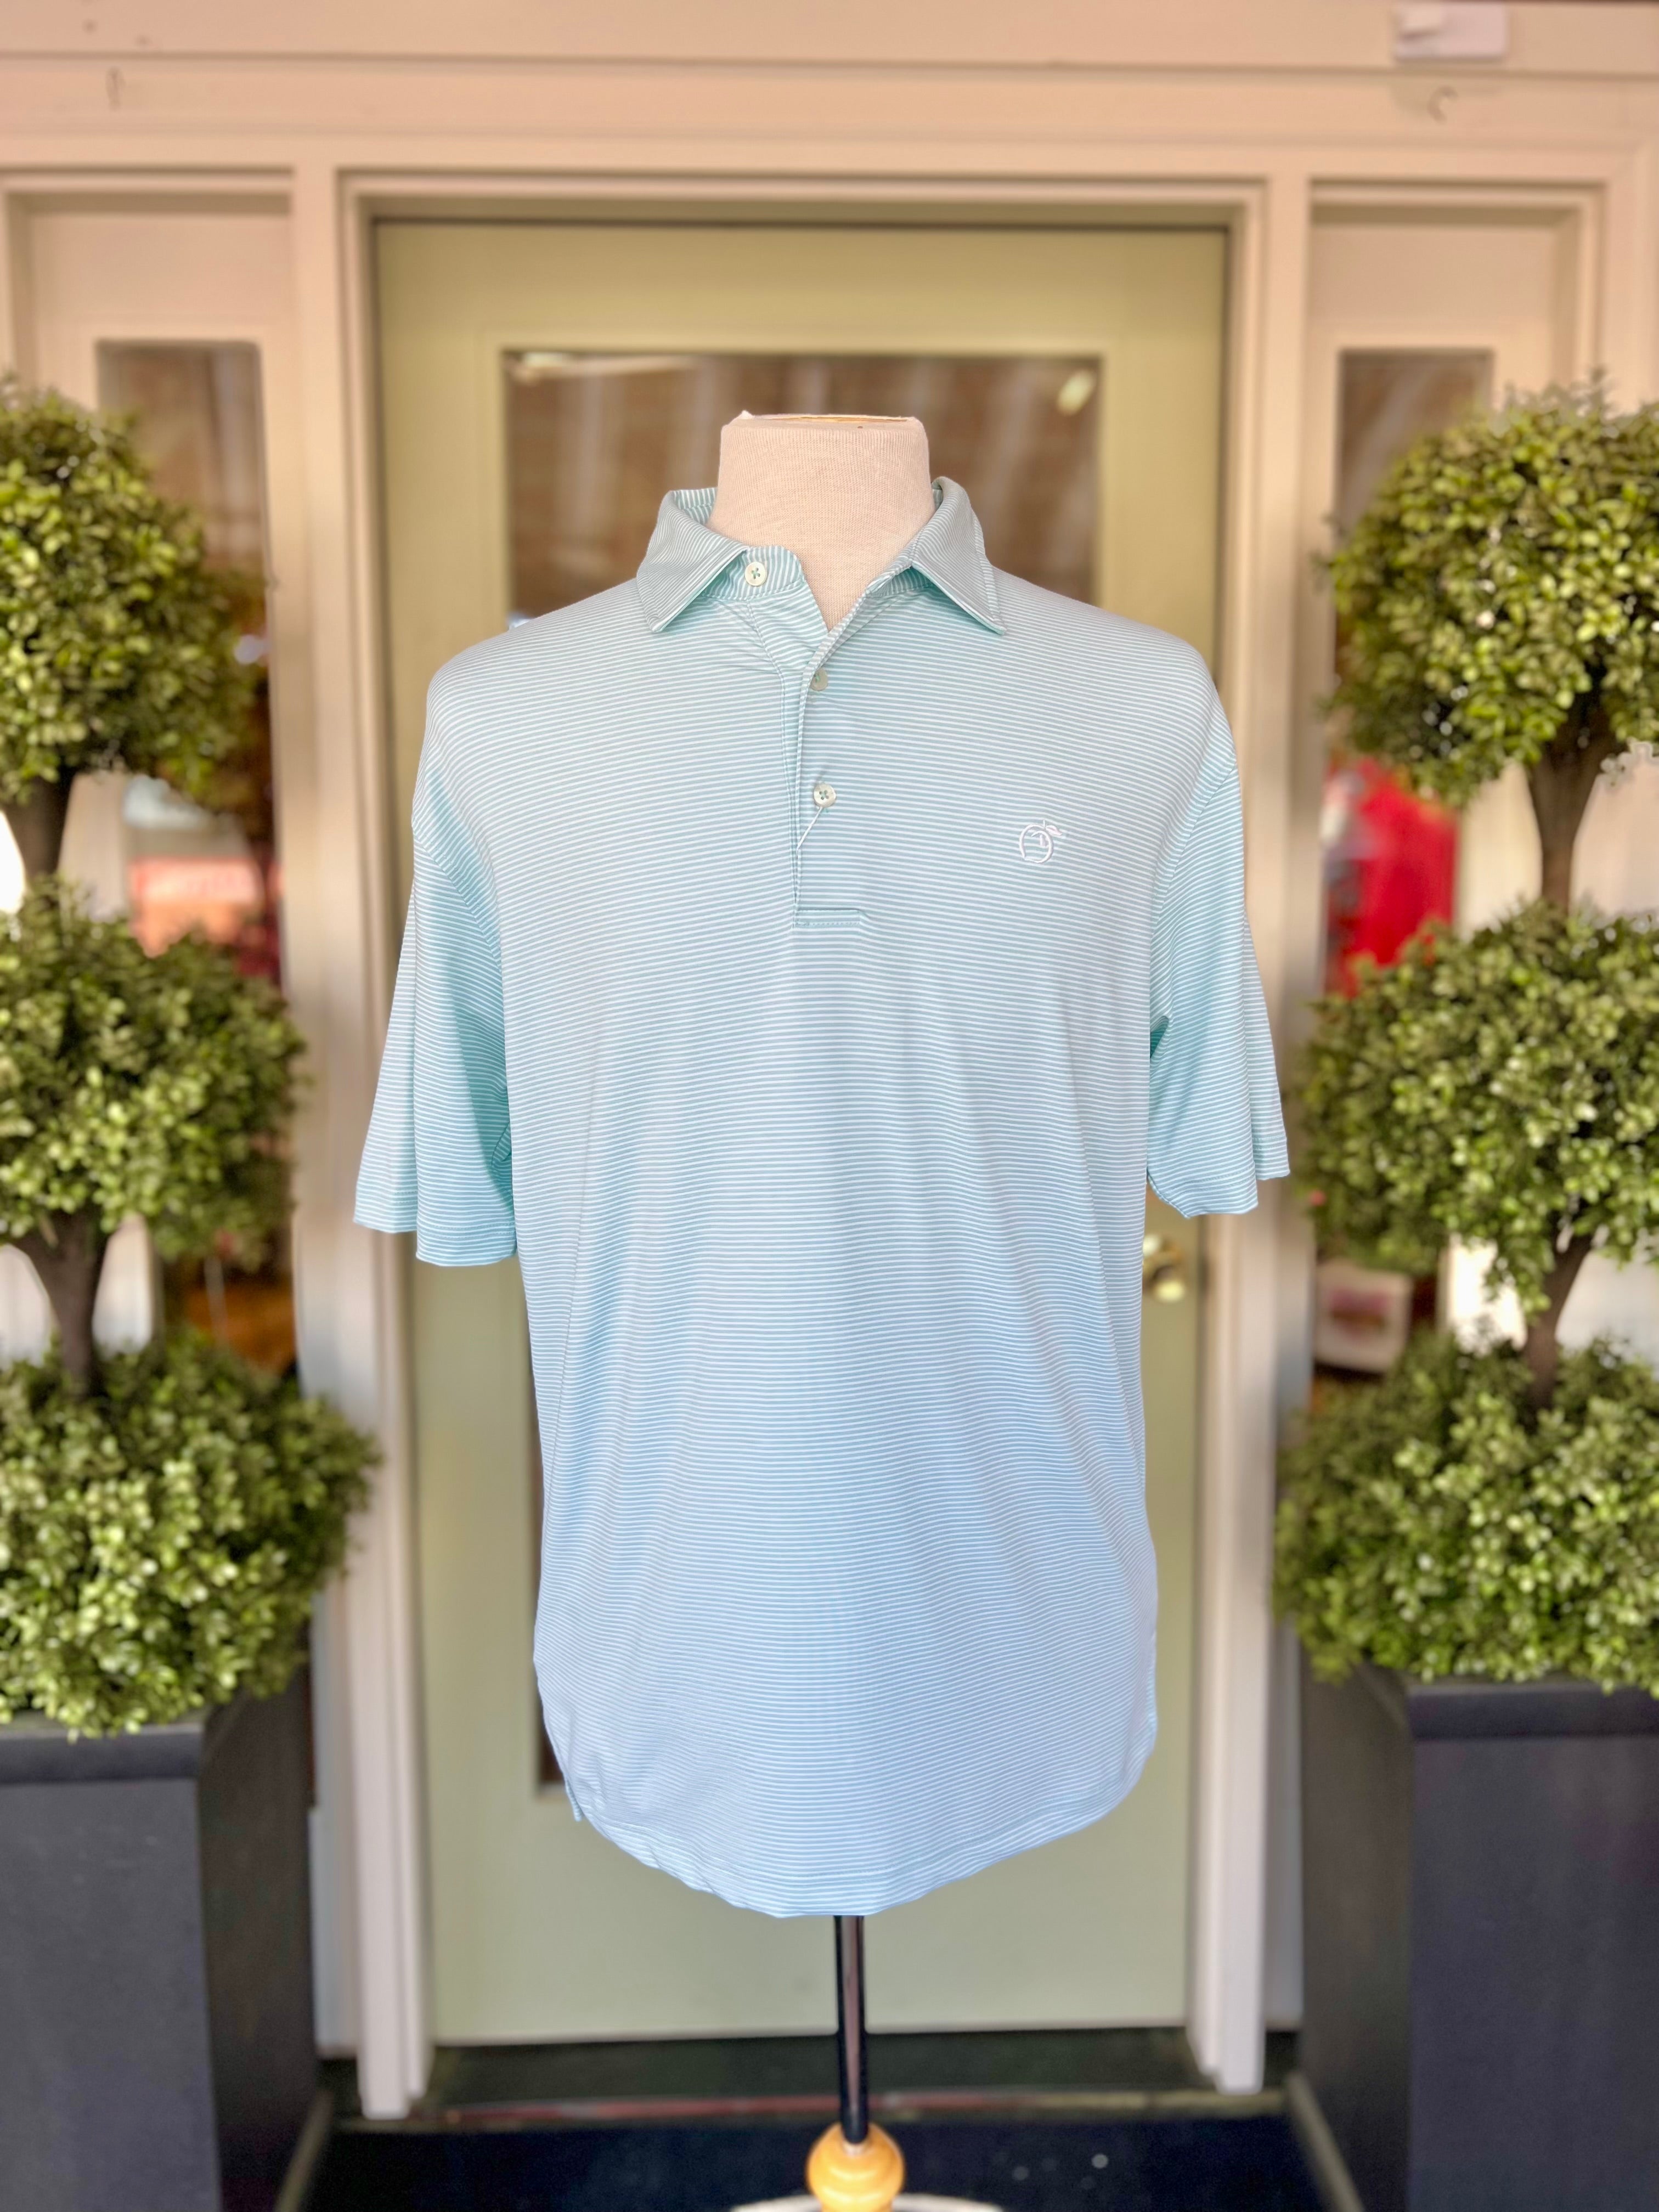 Heathered Azalea Performance Polo in Clearwater & White by Peach State Pride